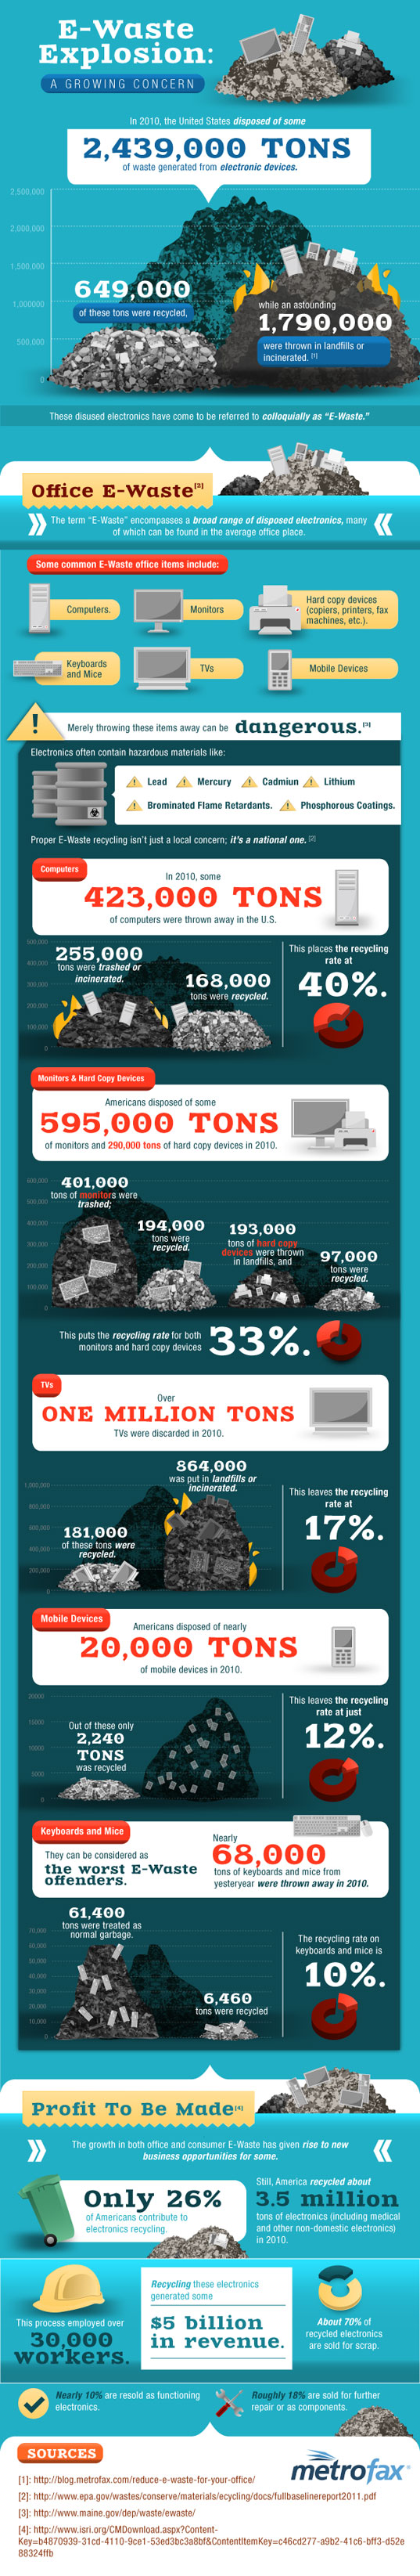 E-Waste Explostion: A Growing Concern